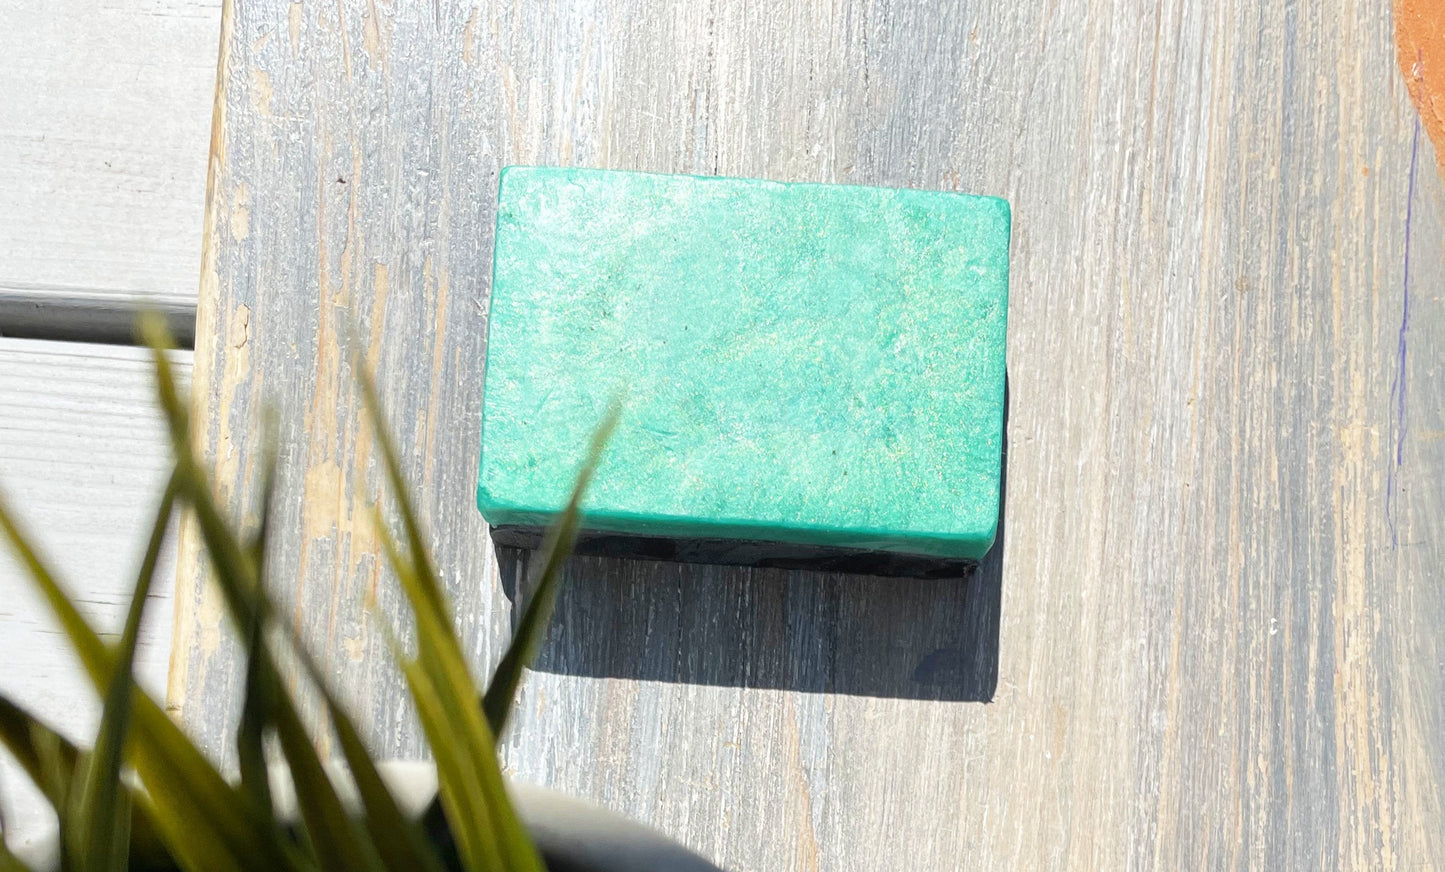 Green and black tea tree essential oil and activated charcoal  handmade and home made vegan soap bar with no palm oil